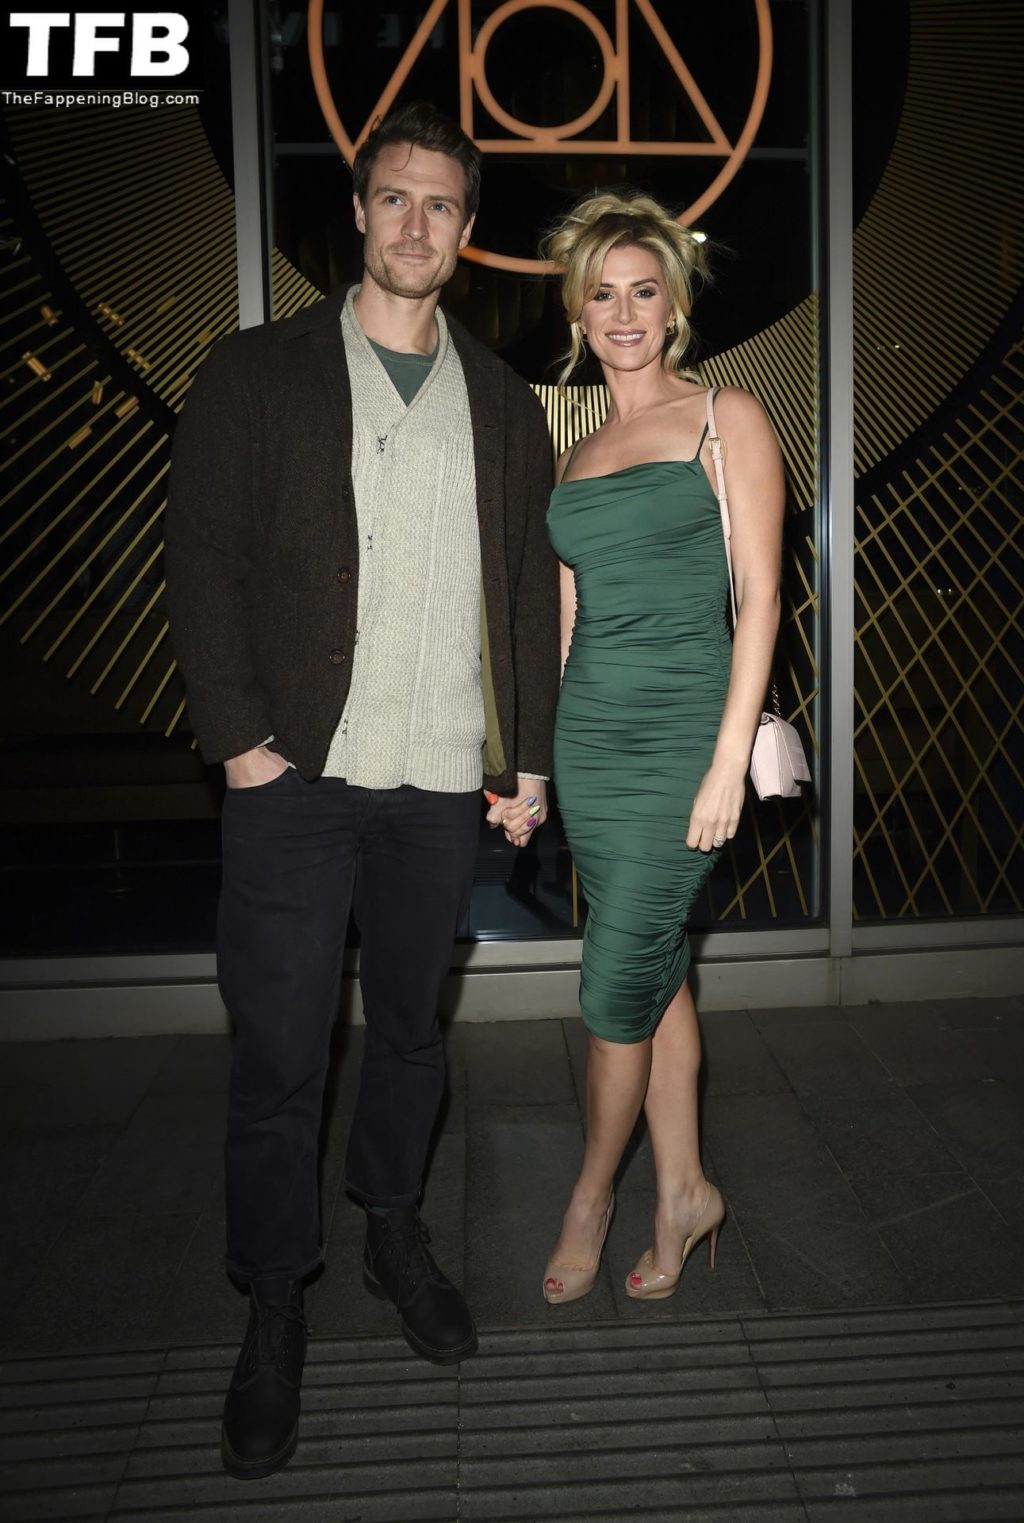 Sarah Jayne Dunn Sexy The Fappening Blog 9 1024x1523 - Sarah Jayne Dunn Looks Hot in a Green Dress Arriving at the Re-Launch of The Alchemist in Spinningfields (26 Photos)